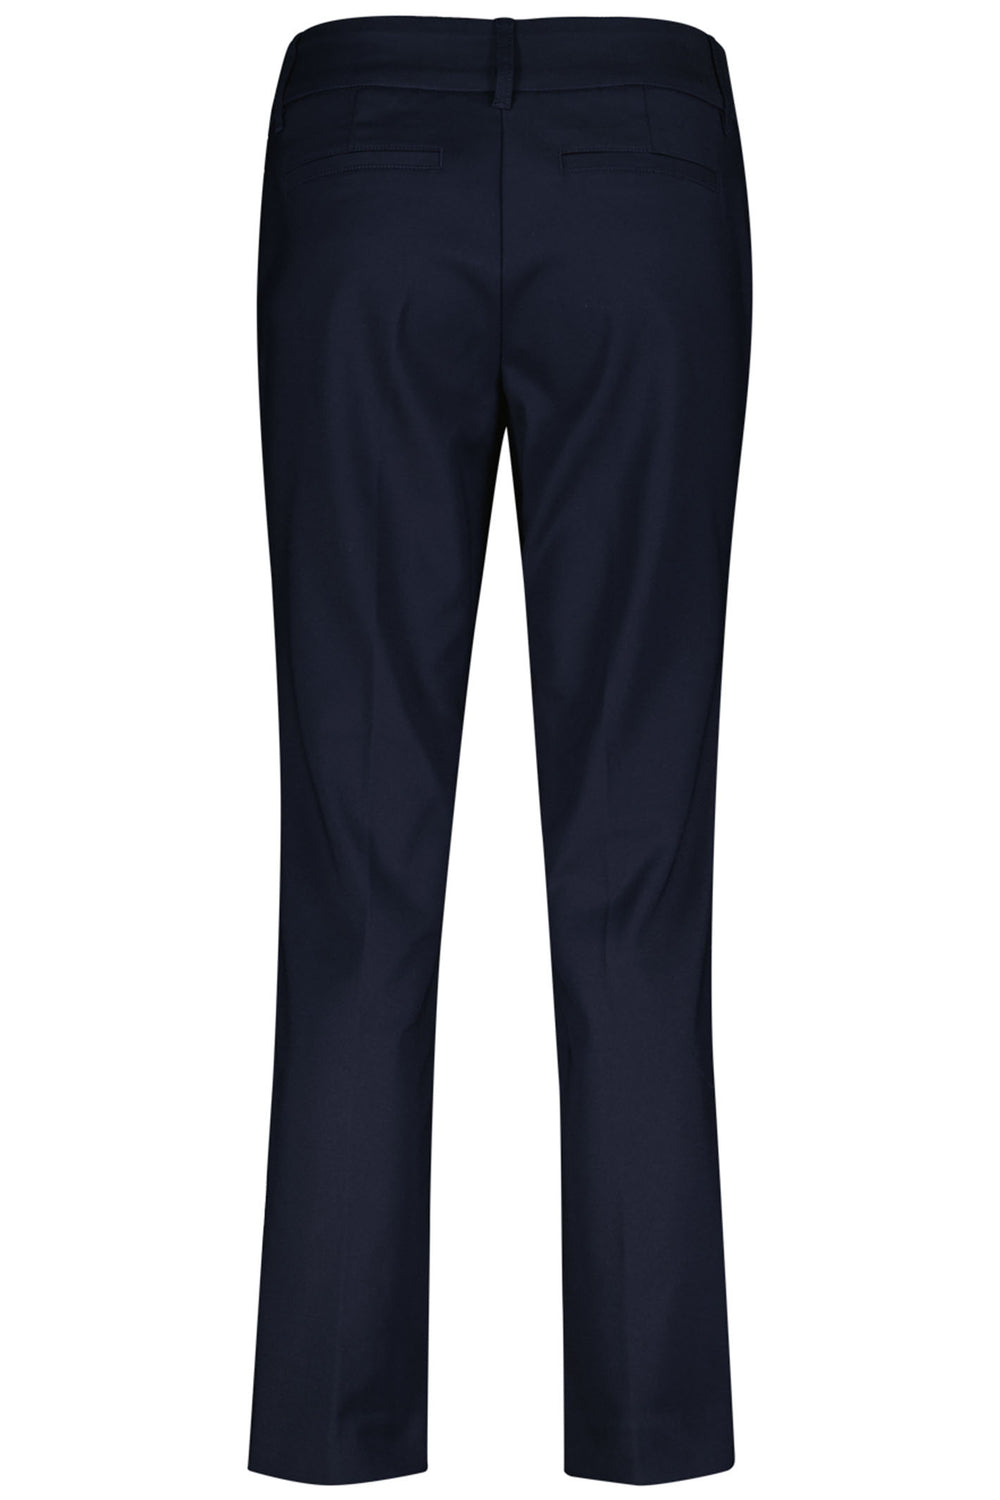 Red Button SRB4205 Diana Navy Smart Trousers 72cm - Olivia Grace Fashion